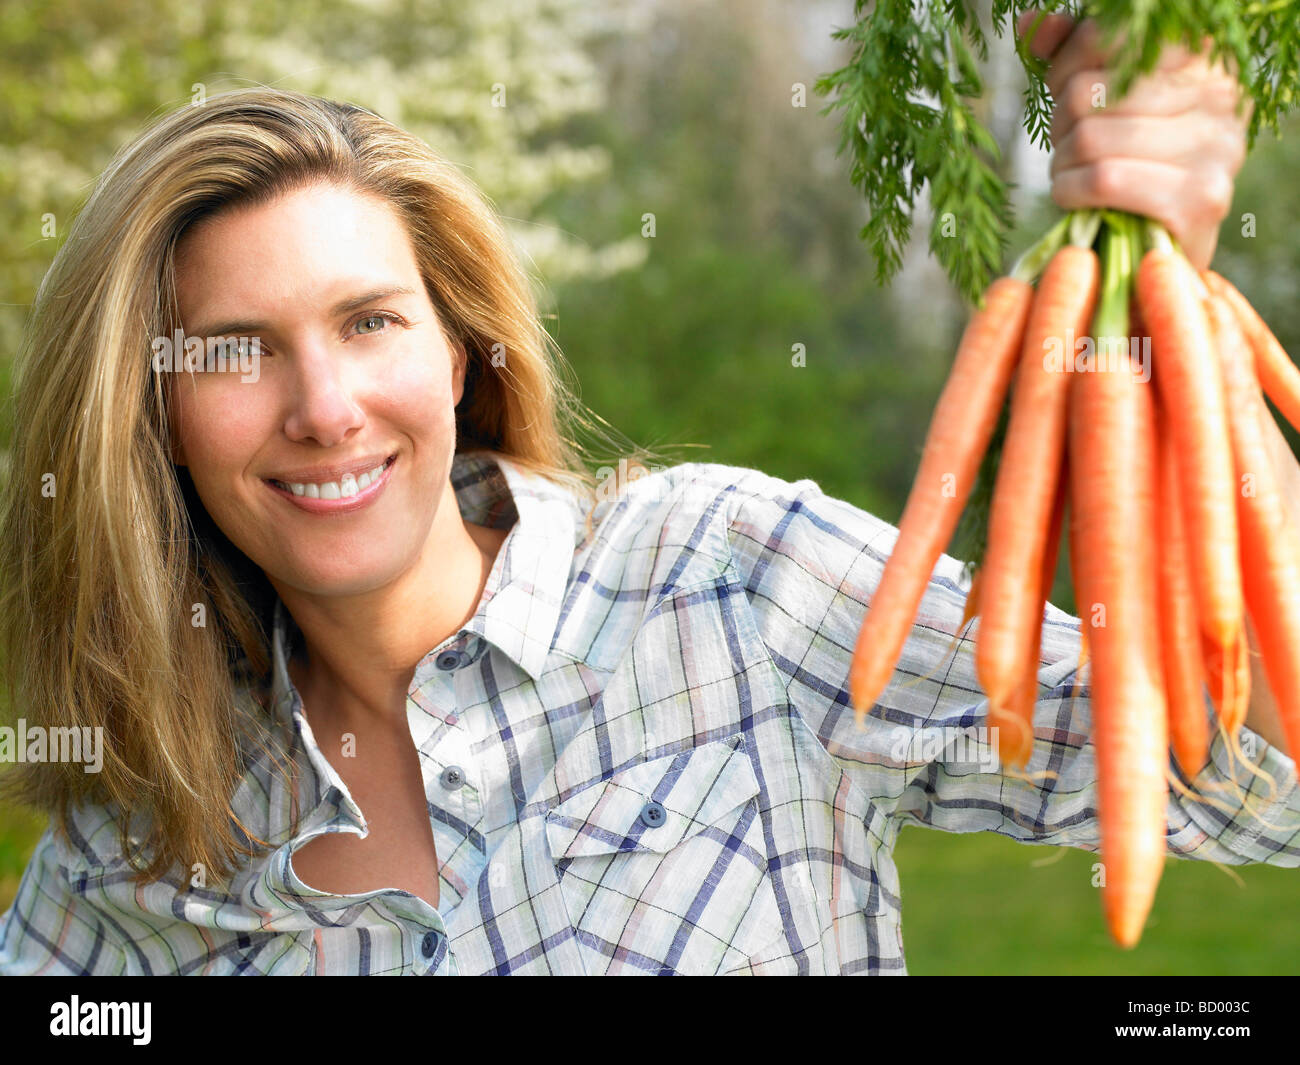 Woman holding a carrot bunch Stock Photo